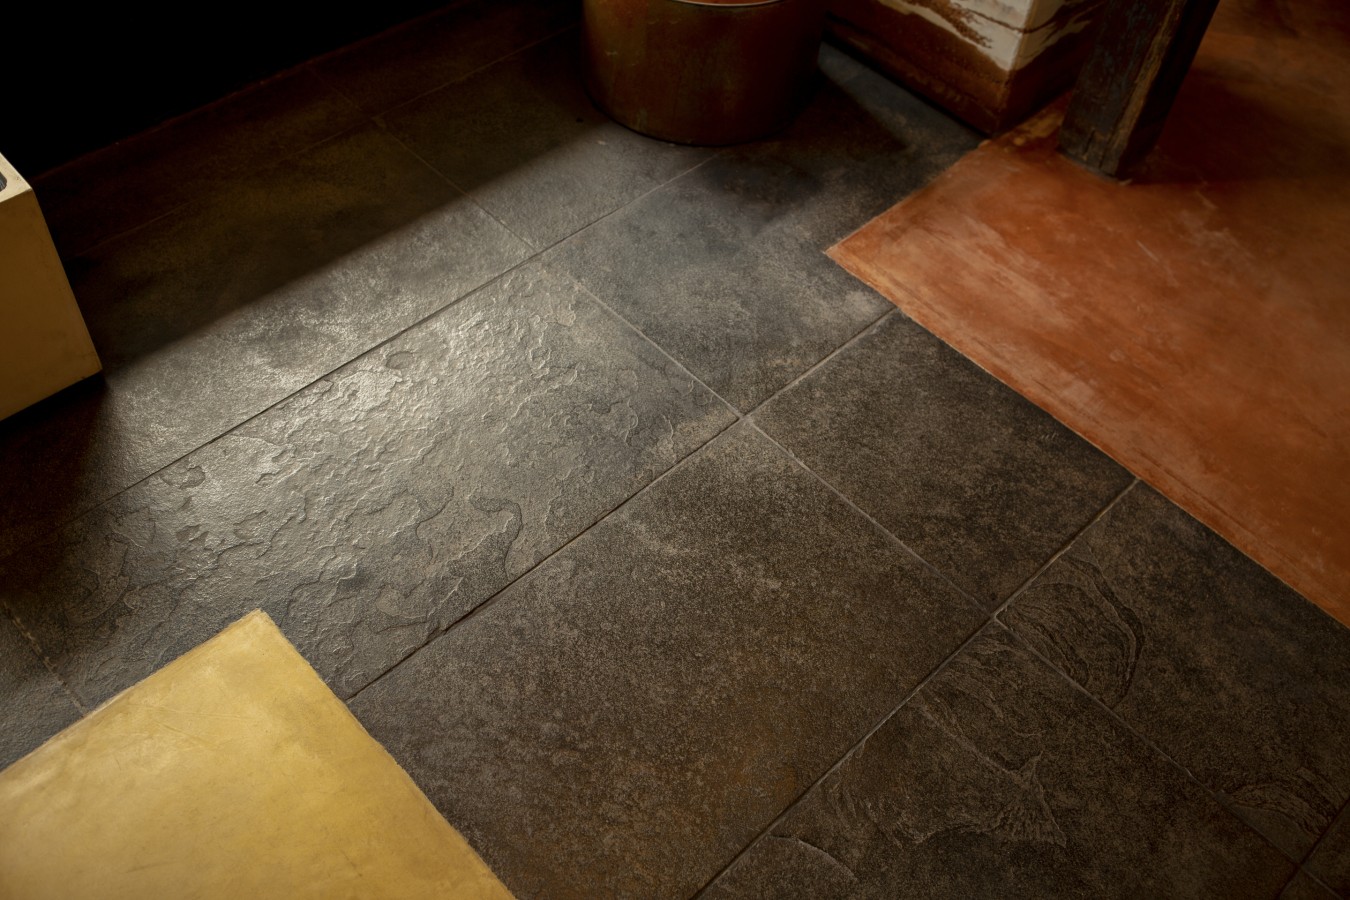 Where natural stone meets handcrafted oxide floors